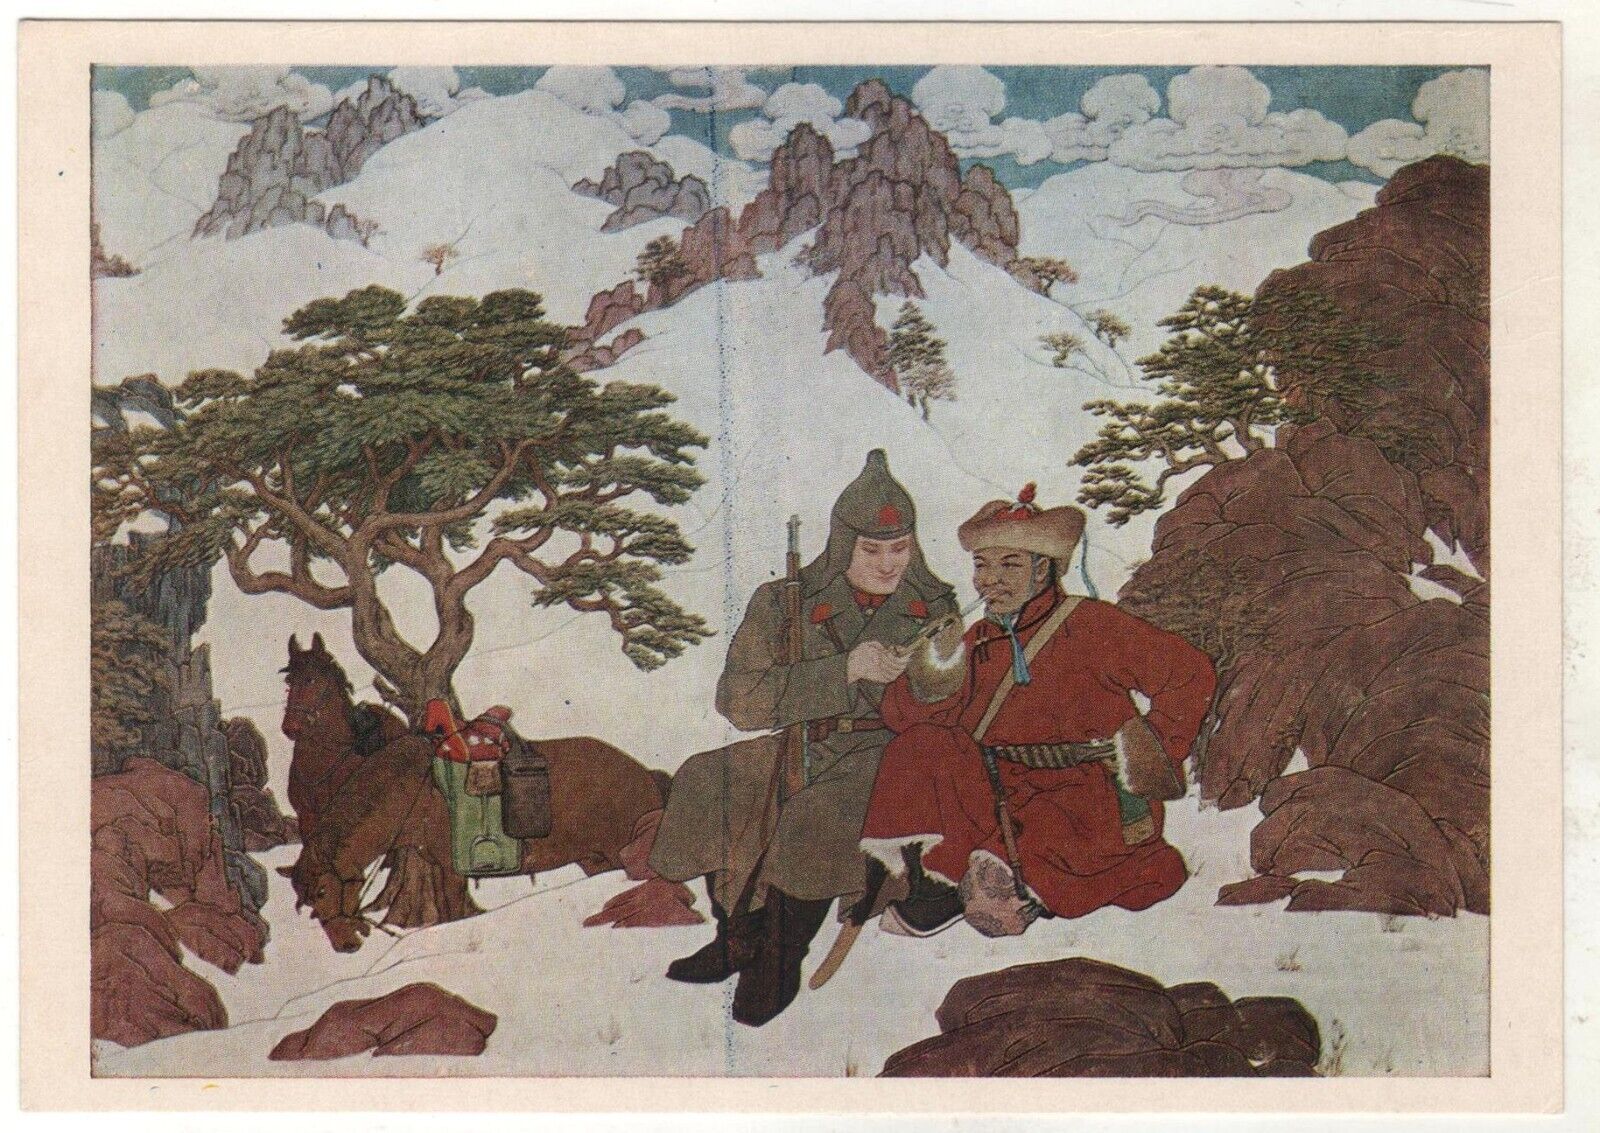 1977 MONGOLIA Mongolian Conversation Red Army soldier Ethnic Russia Postcard Old